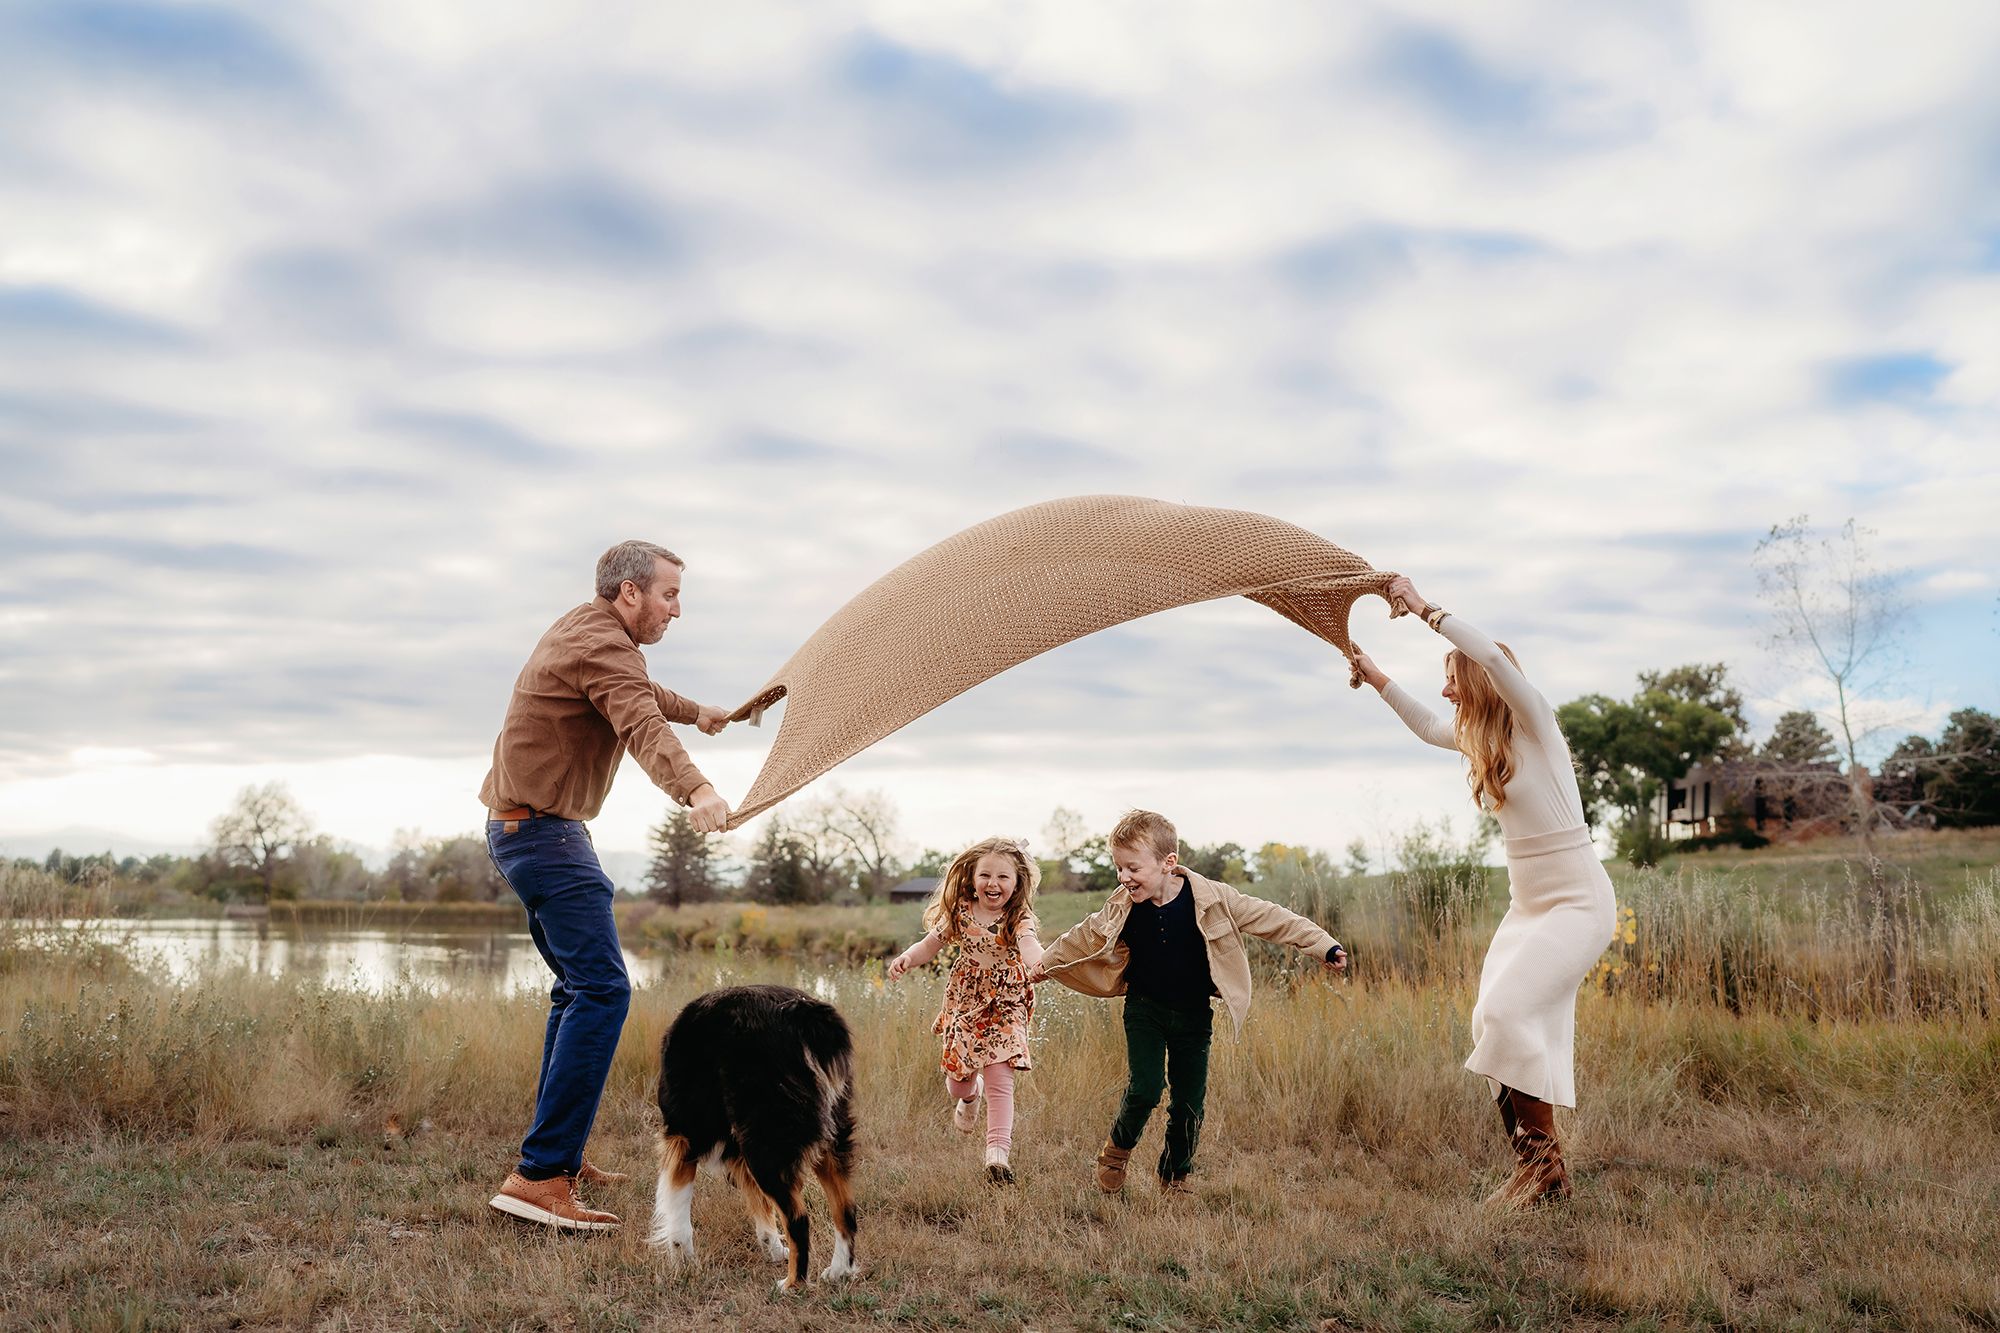 Denver family photographers capture family playing with parachute